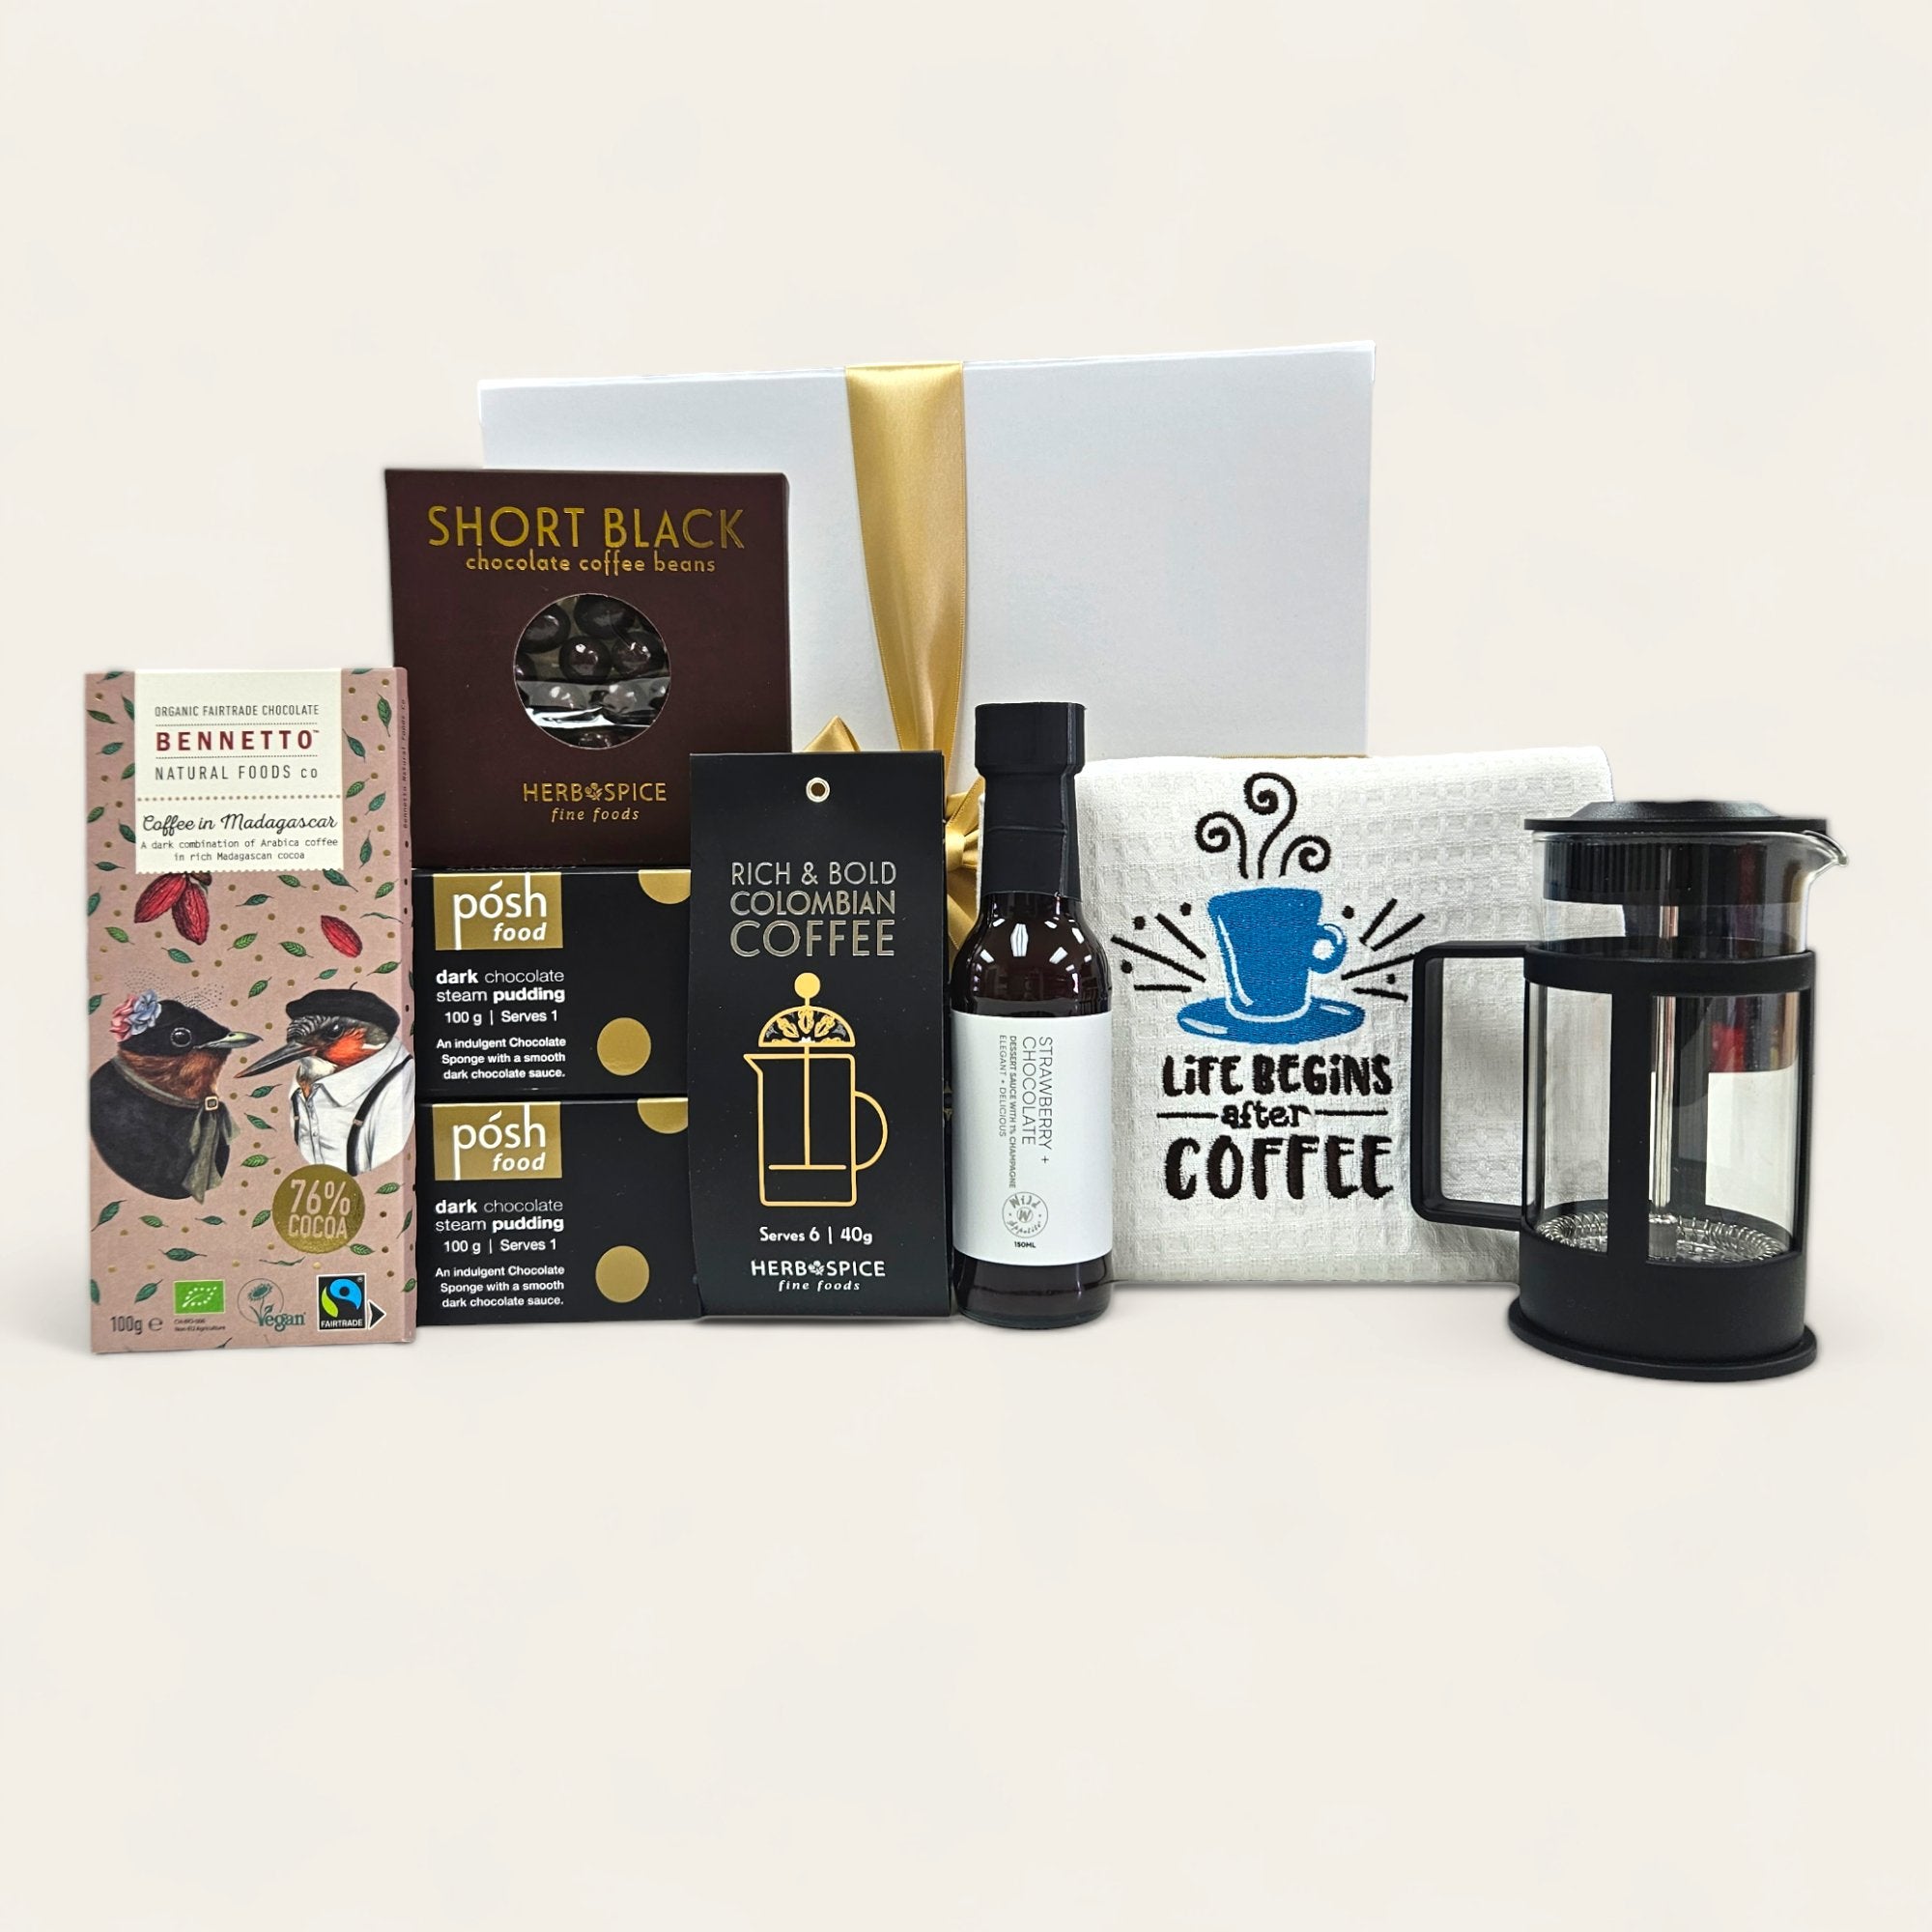 Coffee and Dessert - Beautiful Gifts